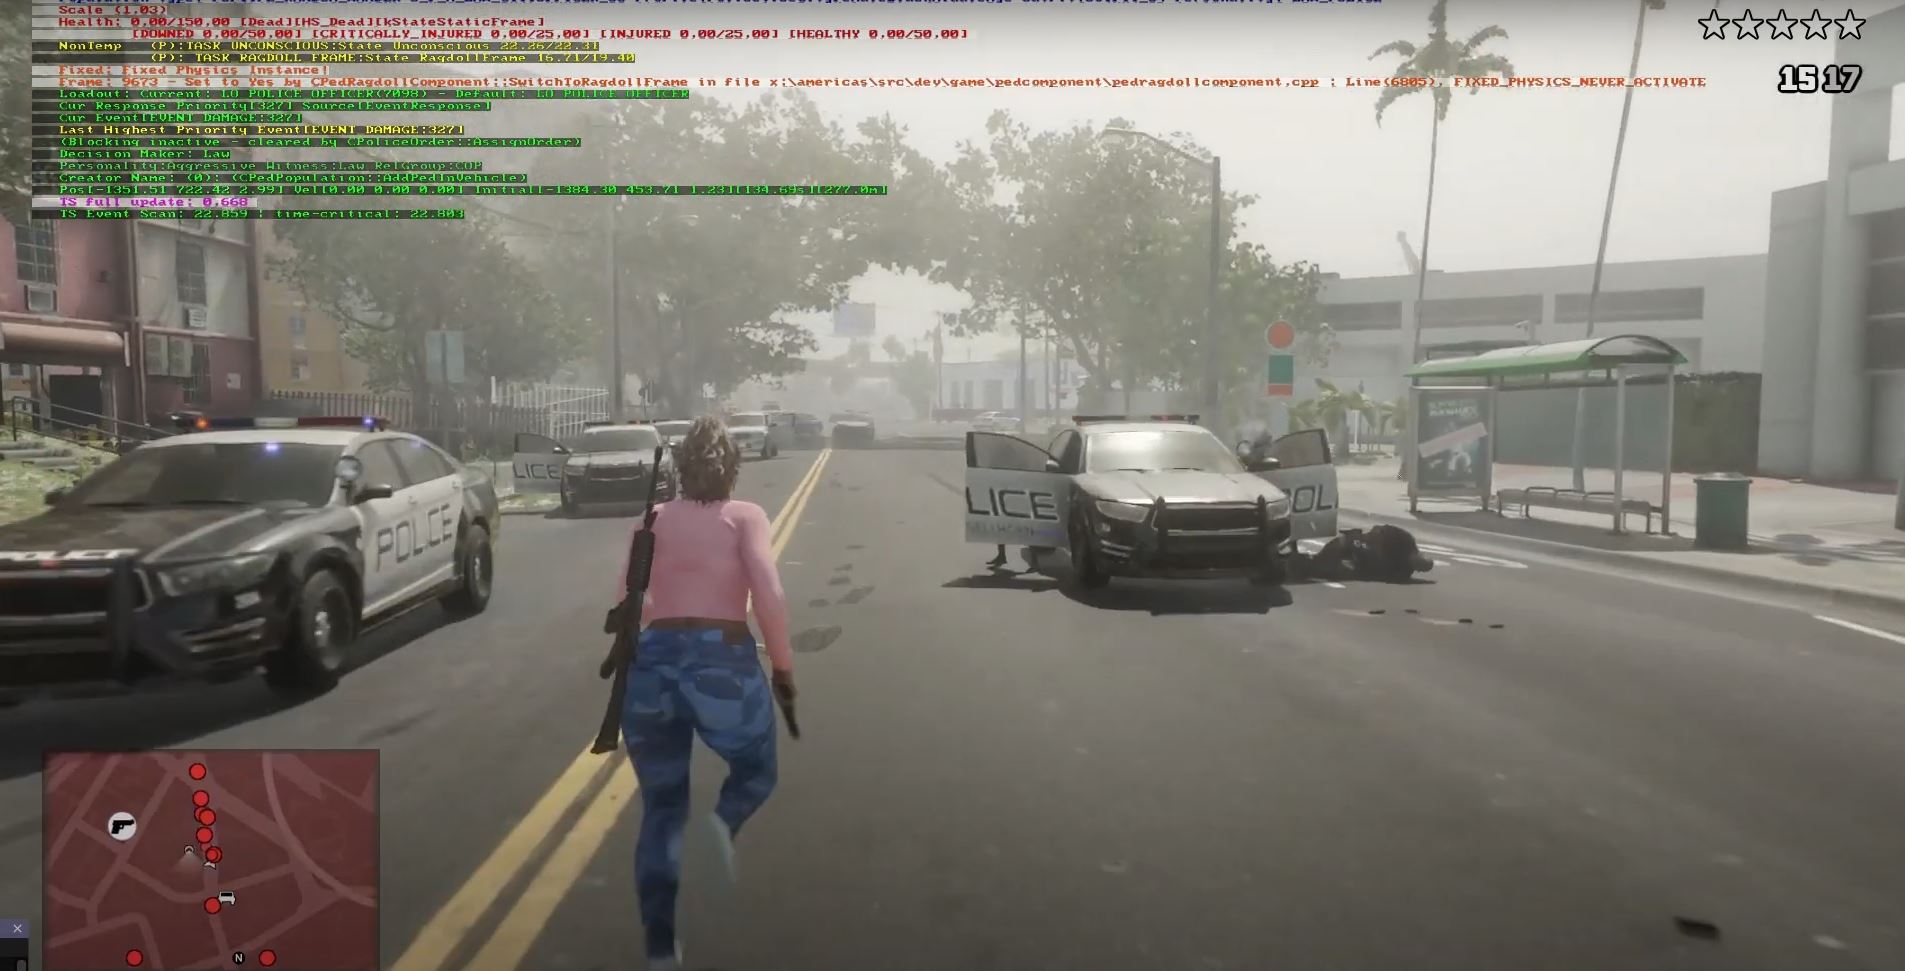 historic-gta-6-leak-shows-the-game-is-set-in-vice-city-gameplay-looks-awesome_7.jpg